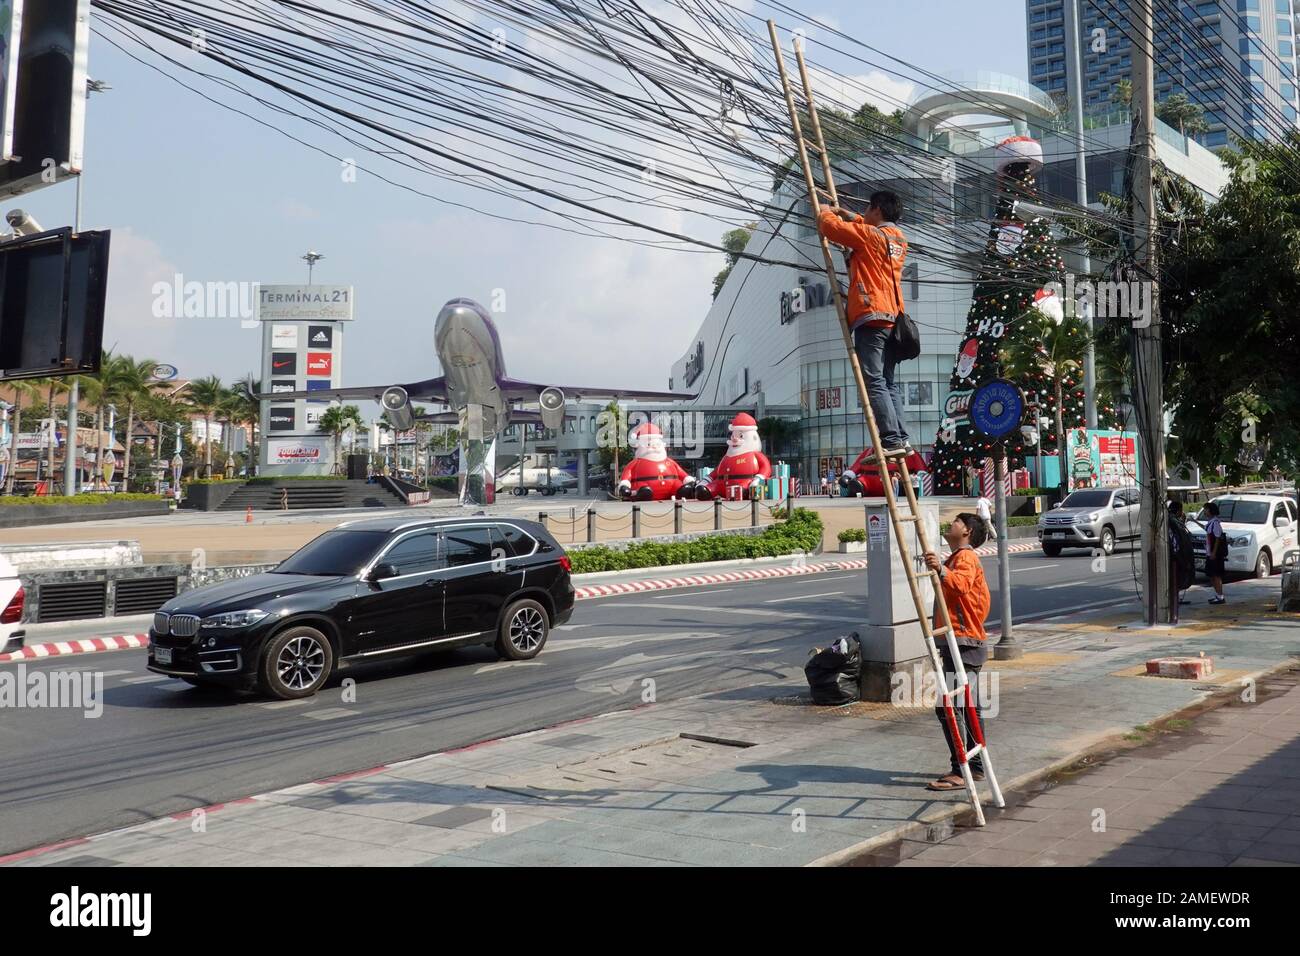 Pattaya, Thailand - December 23, 2019: Workers. Man on a bamboo ladder leans against the power line. Other man holds ladder. Stock Photo